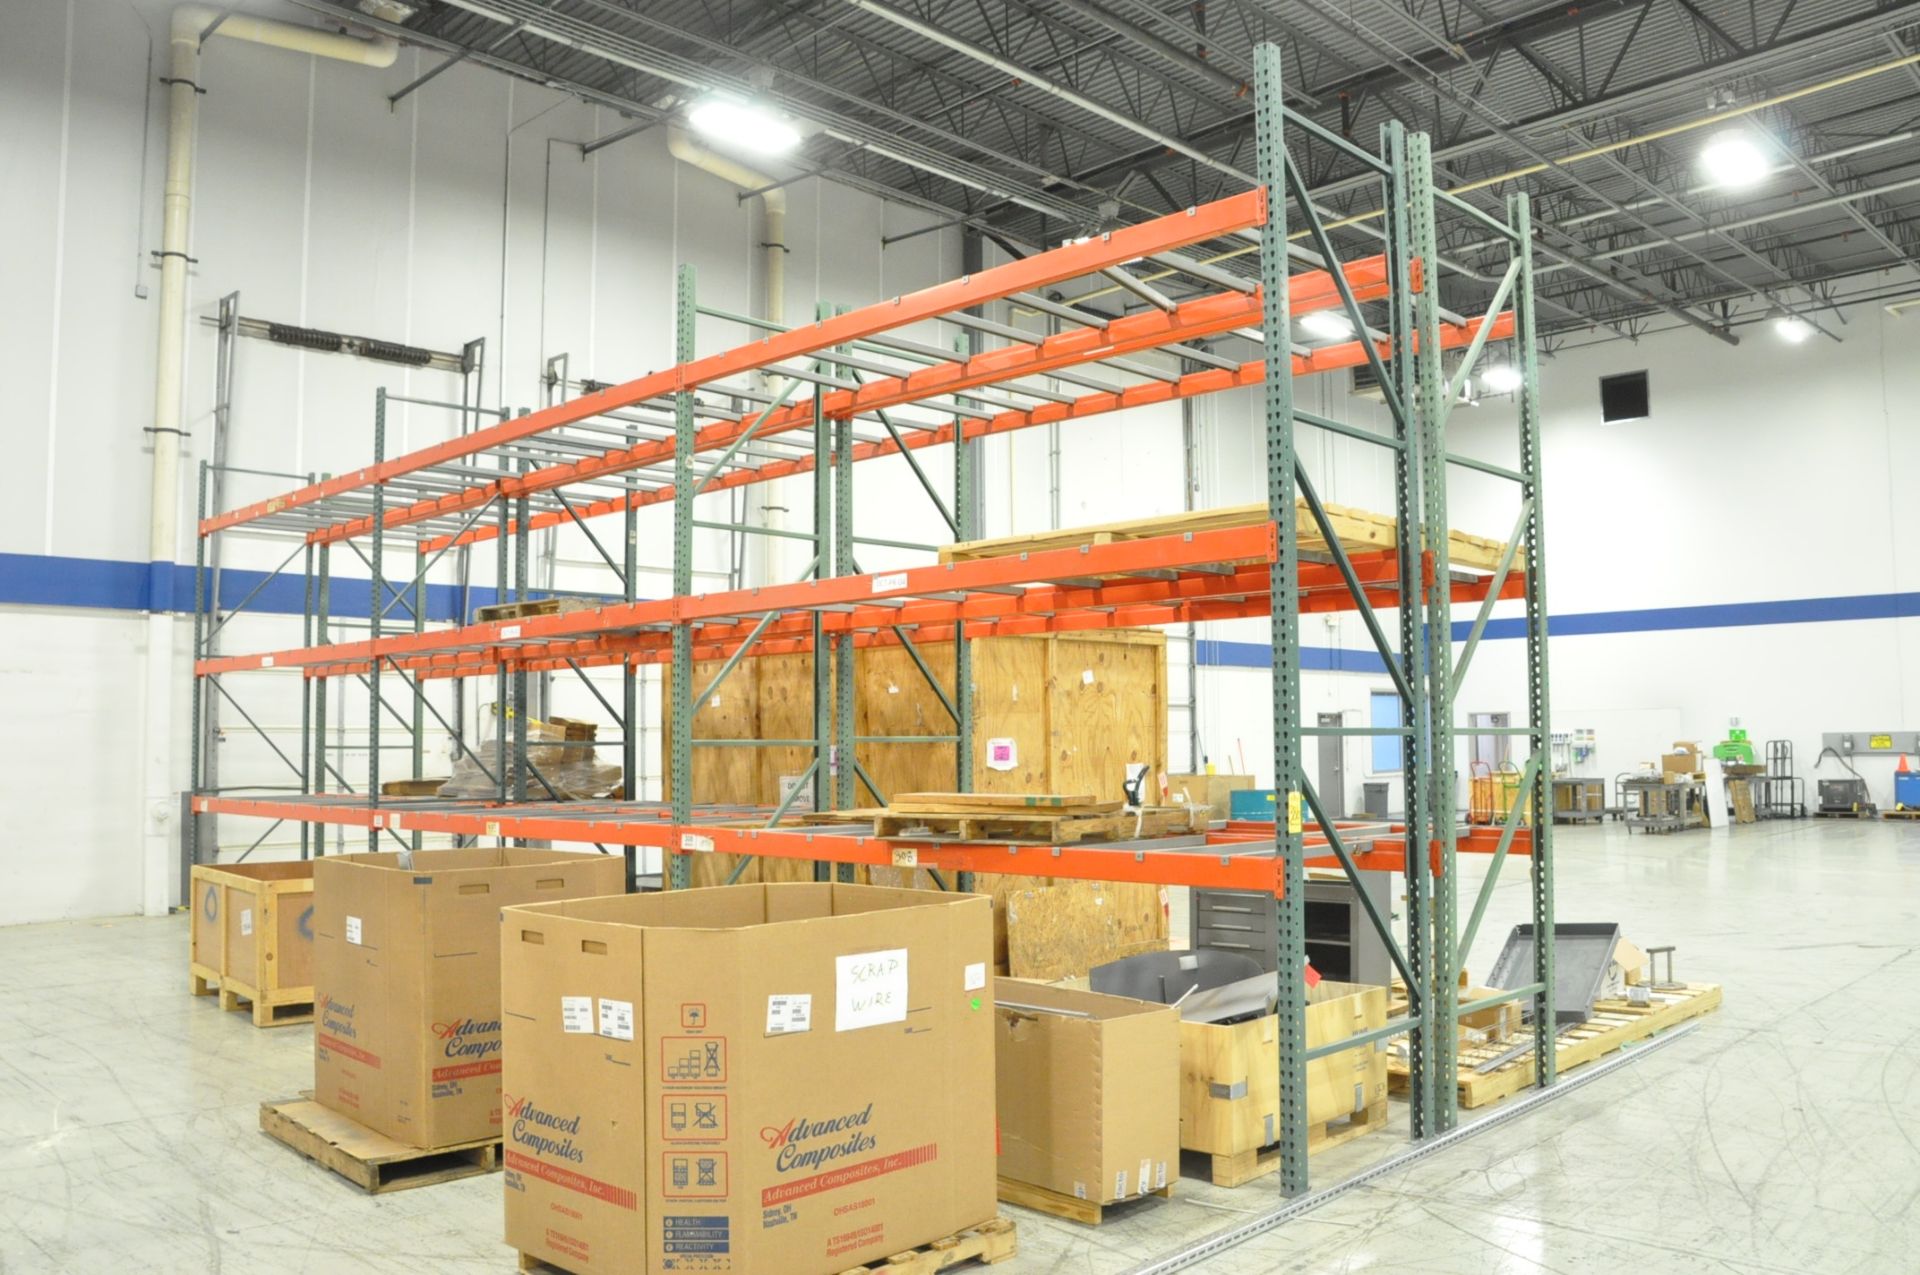 Lot-(6) Sections 12'W x 14'H x 42"D Pallet Racking, (Contents Not Included), (Not to Be Removed